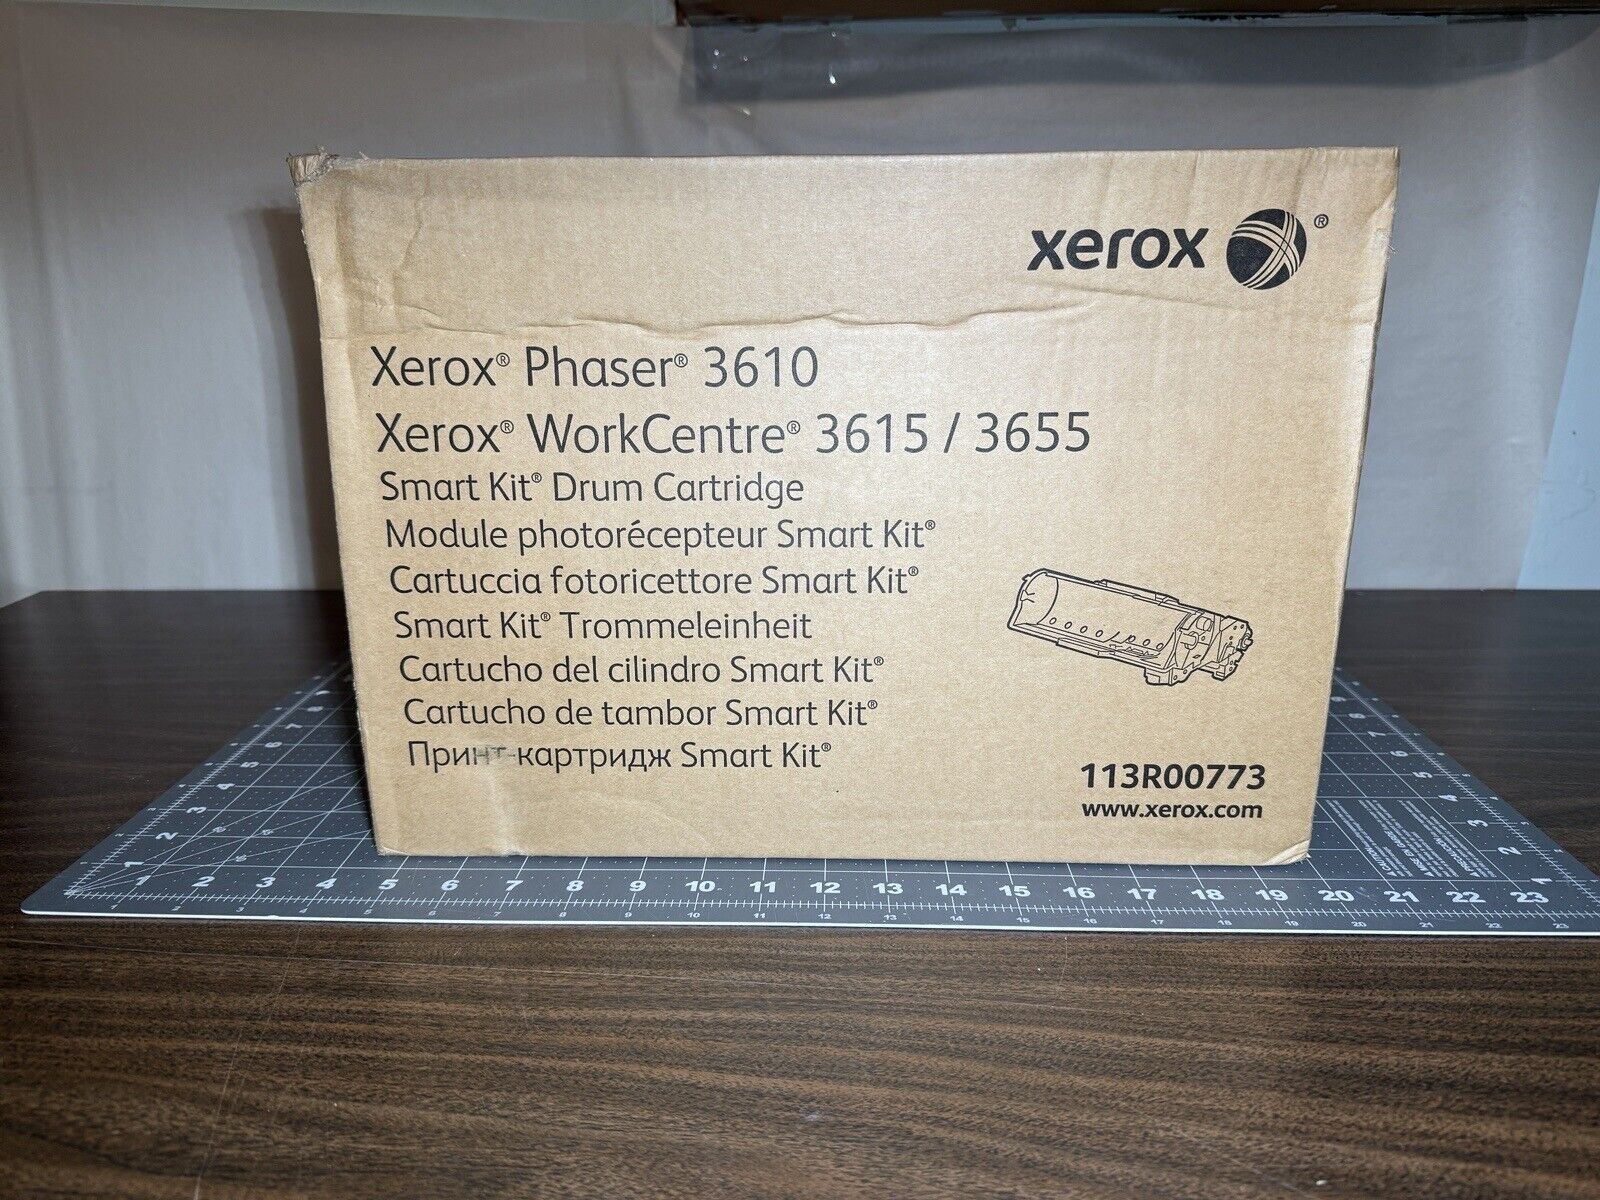 NEW/Sealed Xerox 113R00773 Drum Cartridge for Phaser 3610, WorkCentre 3615, 3655